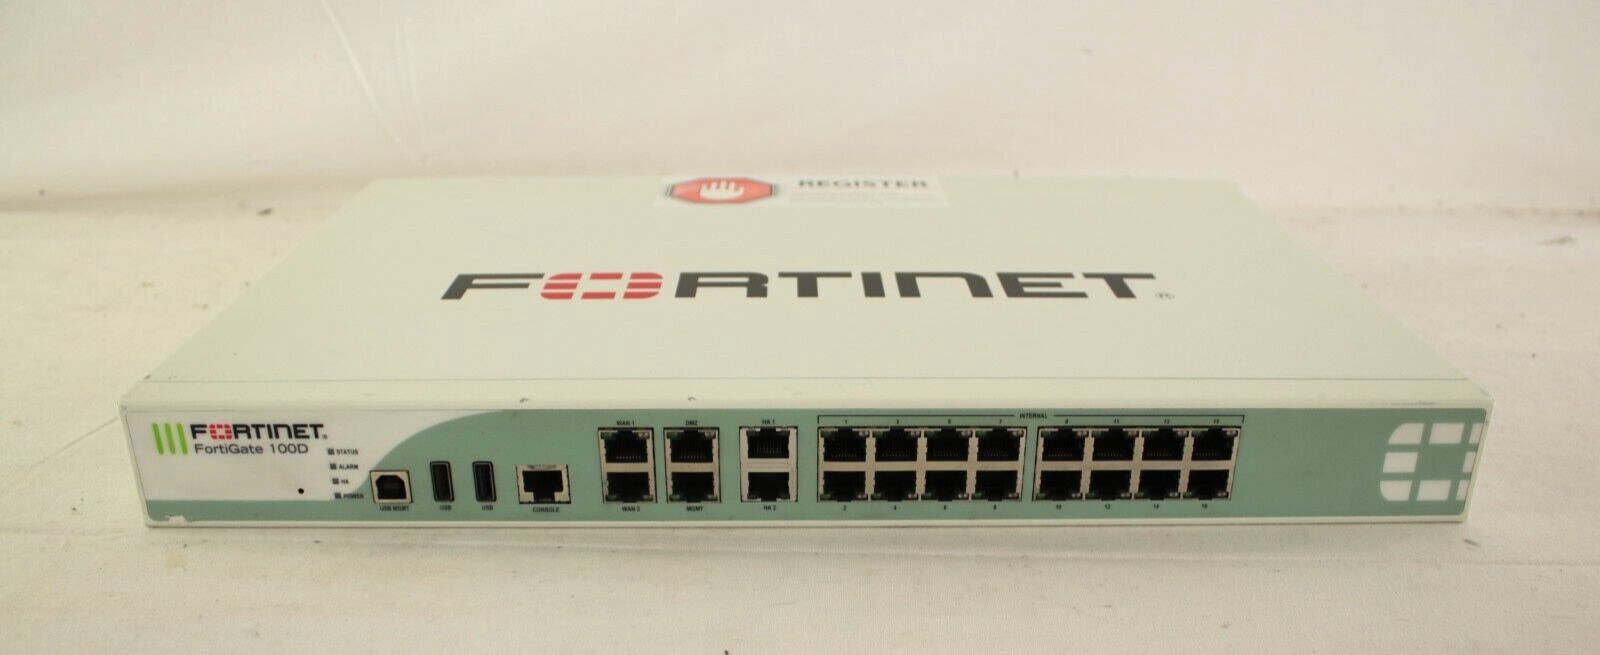 Fortinet FortiGate-100D Network VPN Security Firewall Appliance - Fast Shipping